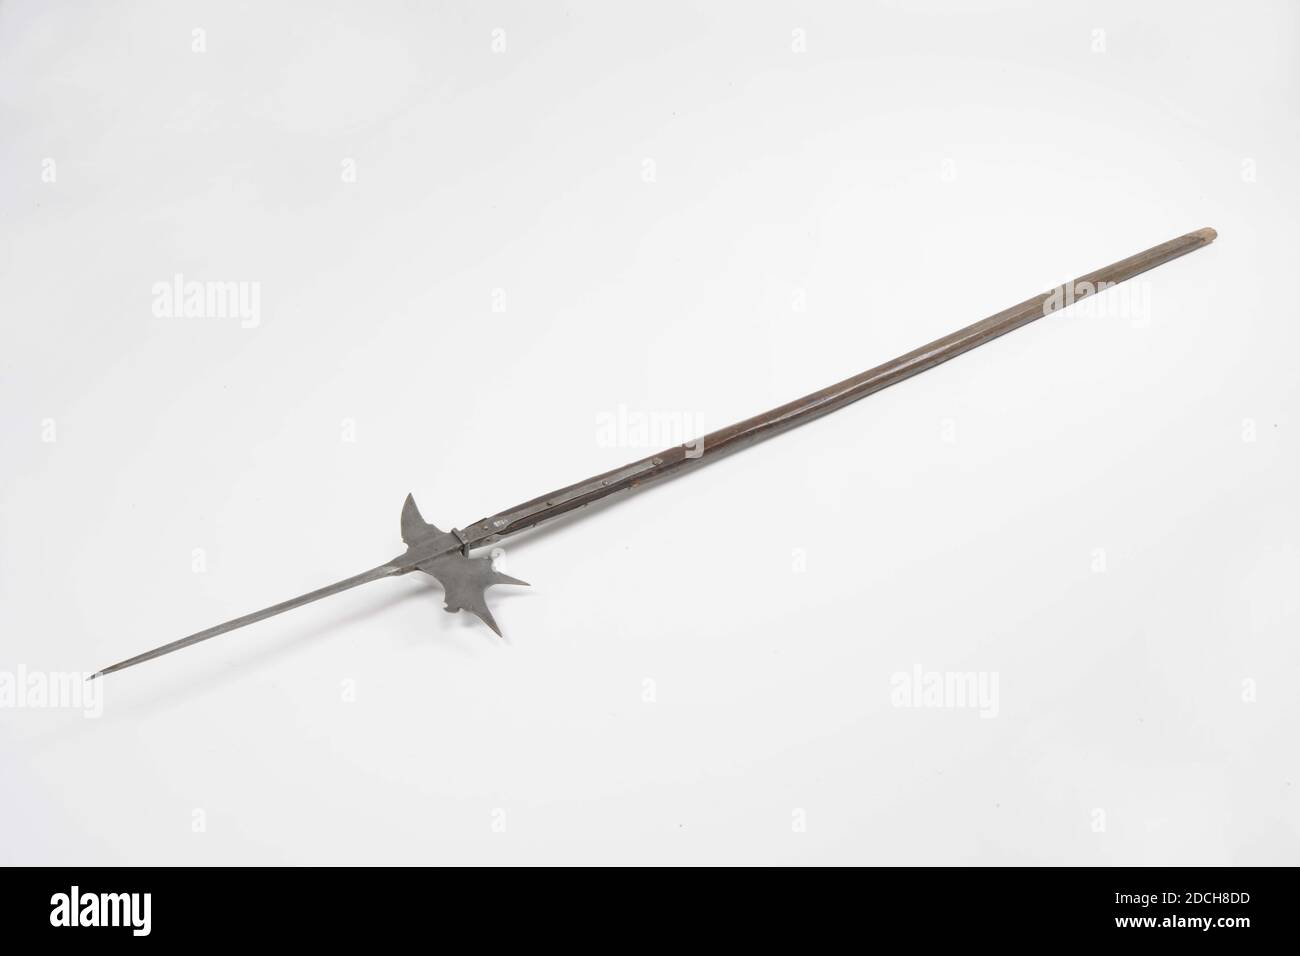 Crescent Blade High Resolution Stock Photography and Images - Alamy